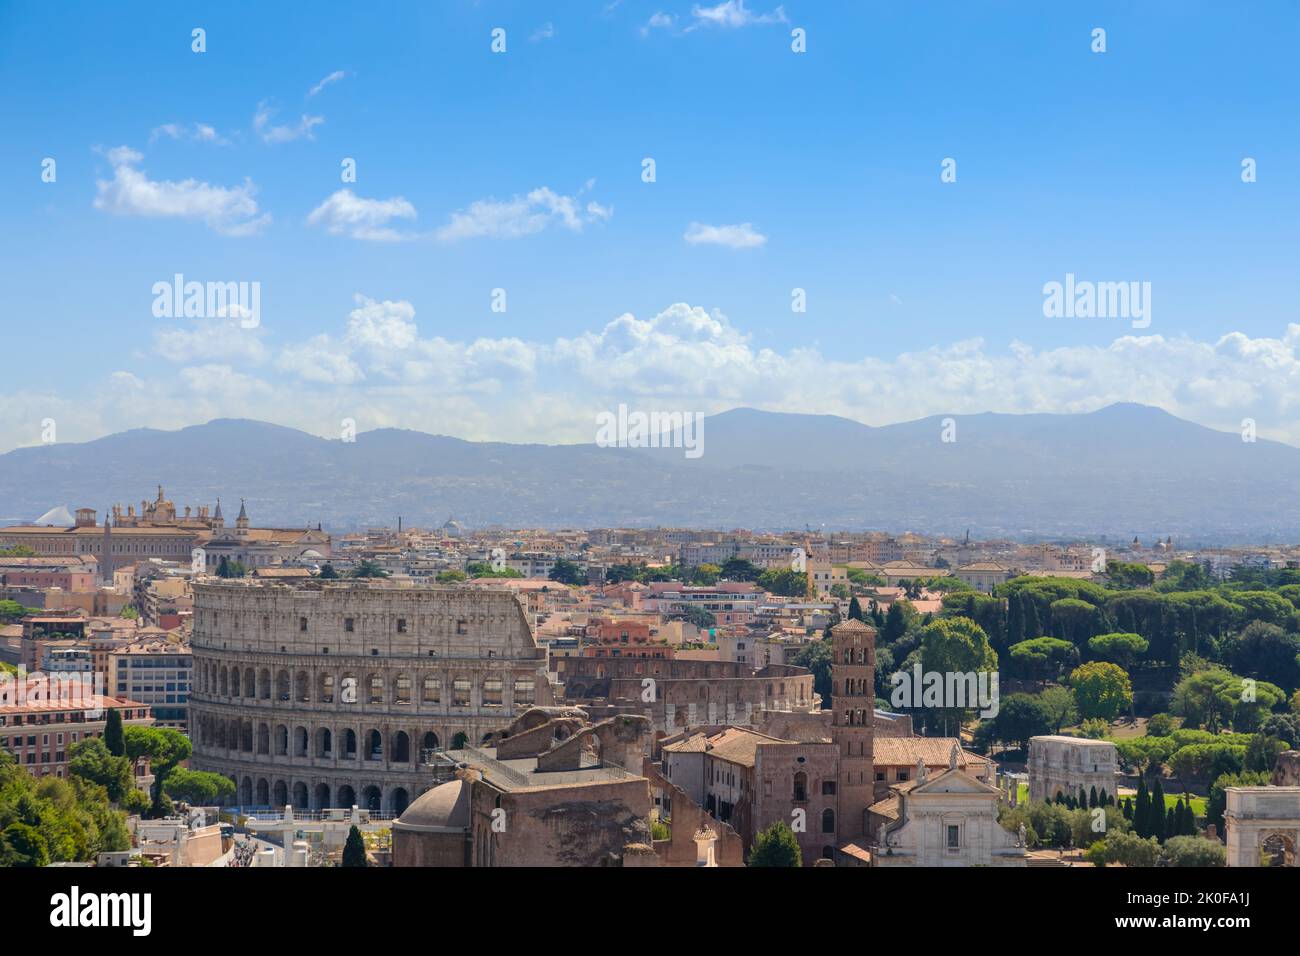 Rome skyline: Colosseum and Imperial Forum. Stock Photo